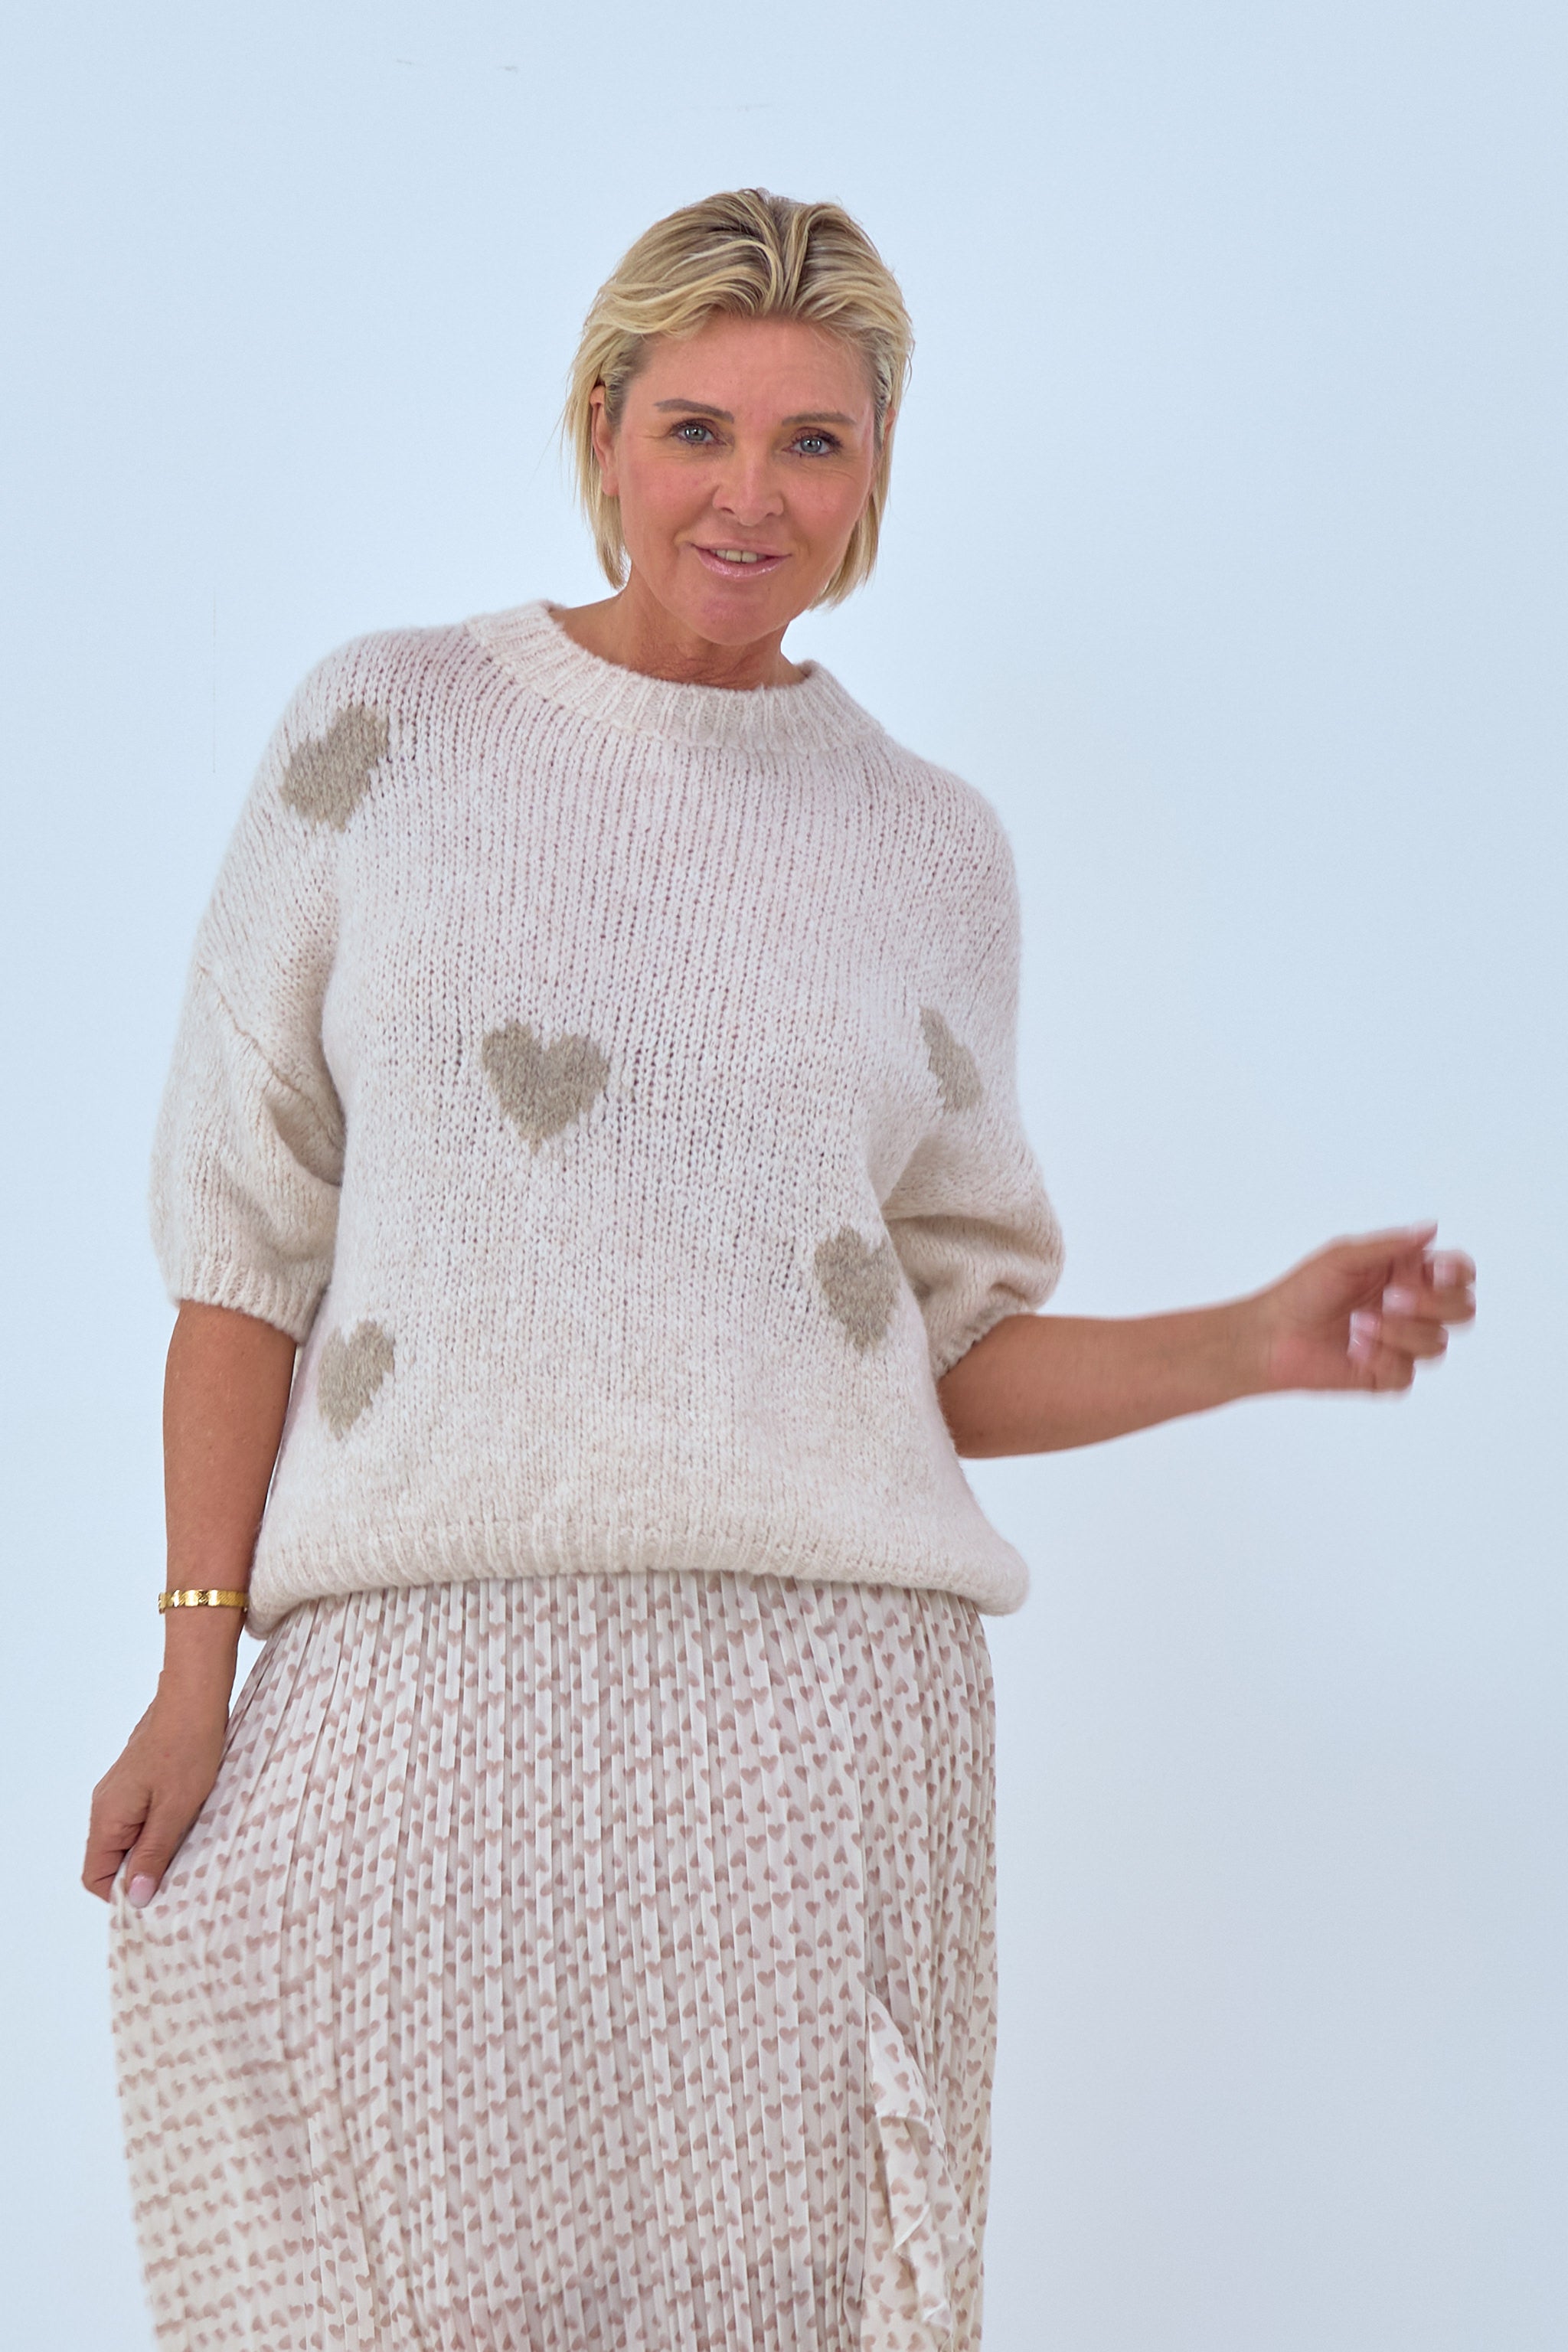 Short-sleeved knitted sweater with hearts, beige-taupe